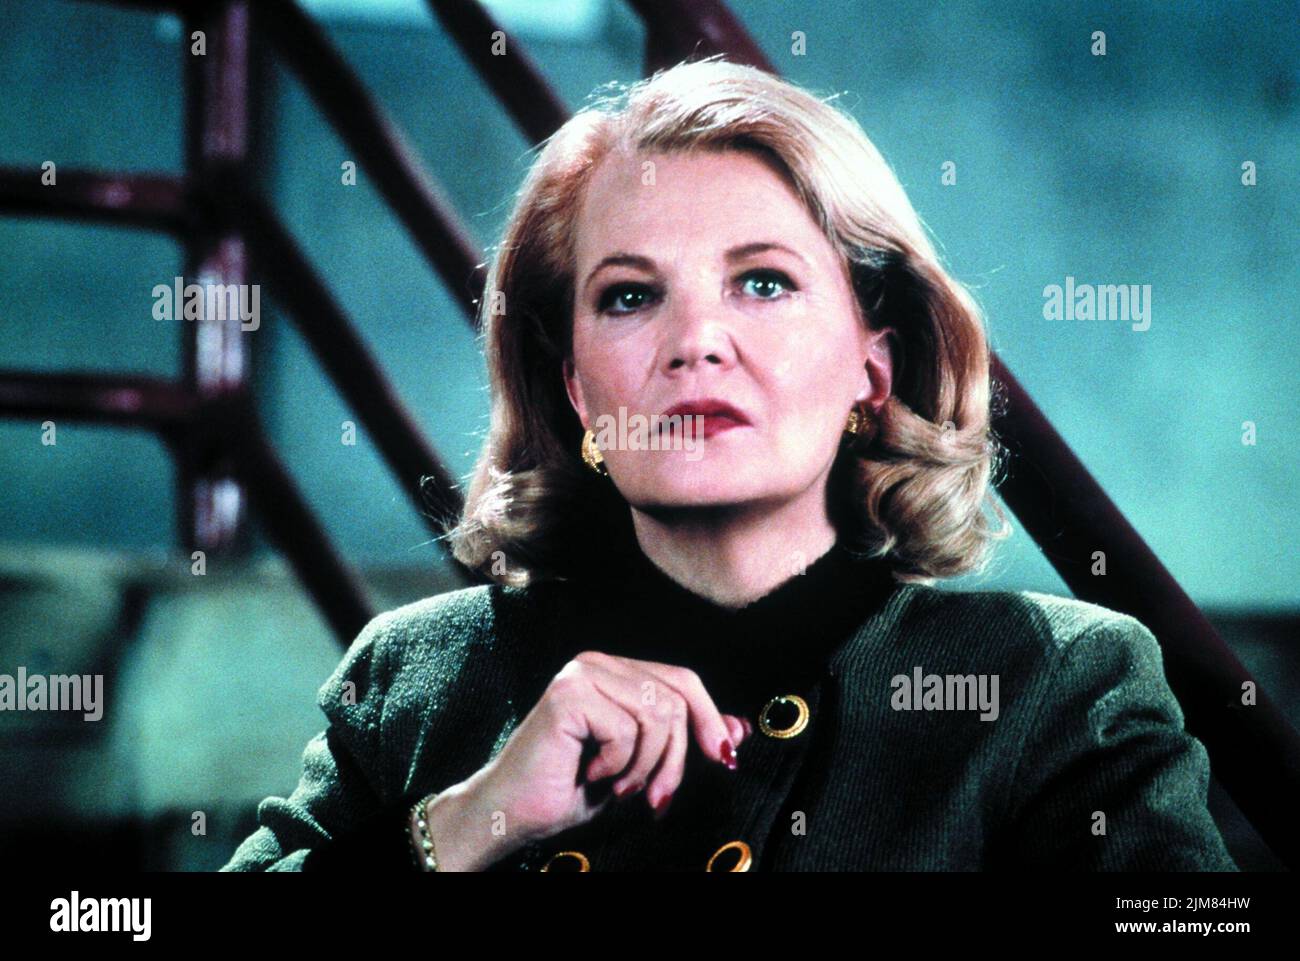 GENA ROWLANDS in SOMETHING TO TALK ABOUT (1995), directed by LASSE HALLSTROM. Credit: WARNER BROTHERS / Album Stock Photo